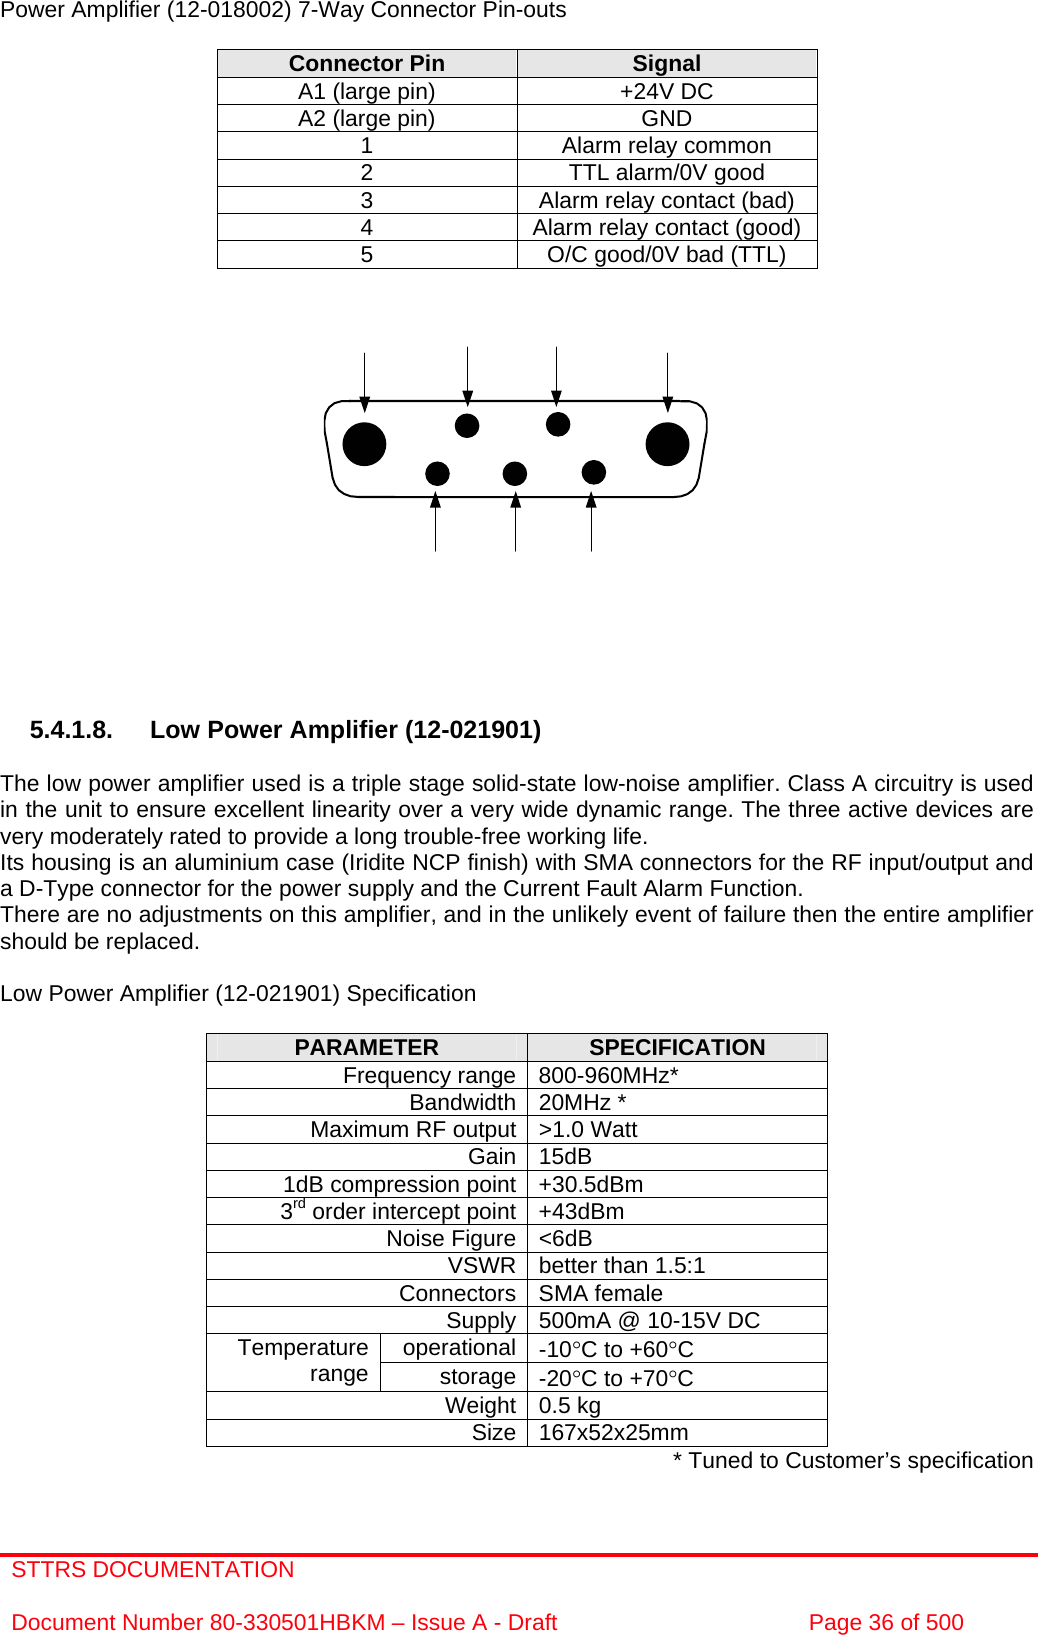 STTRS DOCUMENTATION  Document Number 80-330501HBKM – Issue A - Draft  Page 36 of 500   Power Amplifier (12-018002) 7-Way Connector Pin-outs  Connector Pin  Signal A1 (large pin)  +24V DC A2 (large pin)  GND 1  Alarm relay common 2  TTL alarm/0V good 3  Alarm relay contact (bad) 4  Alarm relay contact (good) 5  O/C good/0V bad (TTL)                  5.4.1.8.  Low Power Amplifier (12-021901)  The low power amplifier used is a triple stage solid-state low-noise amplifier. Class A circuitry is used in the unit to ensure excellent linearity over a very wide dynamic range. The three active devices are very moderately rated to provide a long trouble-free working life.  Its housing is an aluminium case (Iridite NCP finish) with SMA connectors for the RF input/output and a D-Type connector for the power supply and the Current Fault Alarm Function. There are no adjustments on this amplifier, and in the unlikely event of failure then the entire amplifier should be replaced.  Low Power Amplifier (12-021901) Specification  PARAMETER  SPECIFICATION Frequency range 800-960MHz* Bandwidth 20MHz * Maximum RF output &gt;1.0 Watt Gain 15dB 1dB compression point +30.5dBm 3rd order intercept point +43dBm Noise Figure &lt;6dB VSWR better than 1.5:1 Connectors SMA female Supply 500mA @ 10-15V DC operational -10°C to +60°C Temperature range  storage -20°C to +70°C Weight 0.5 kg Size 167x52x25mm * Tuned to Customer’s specification 